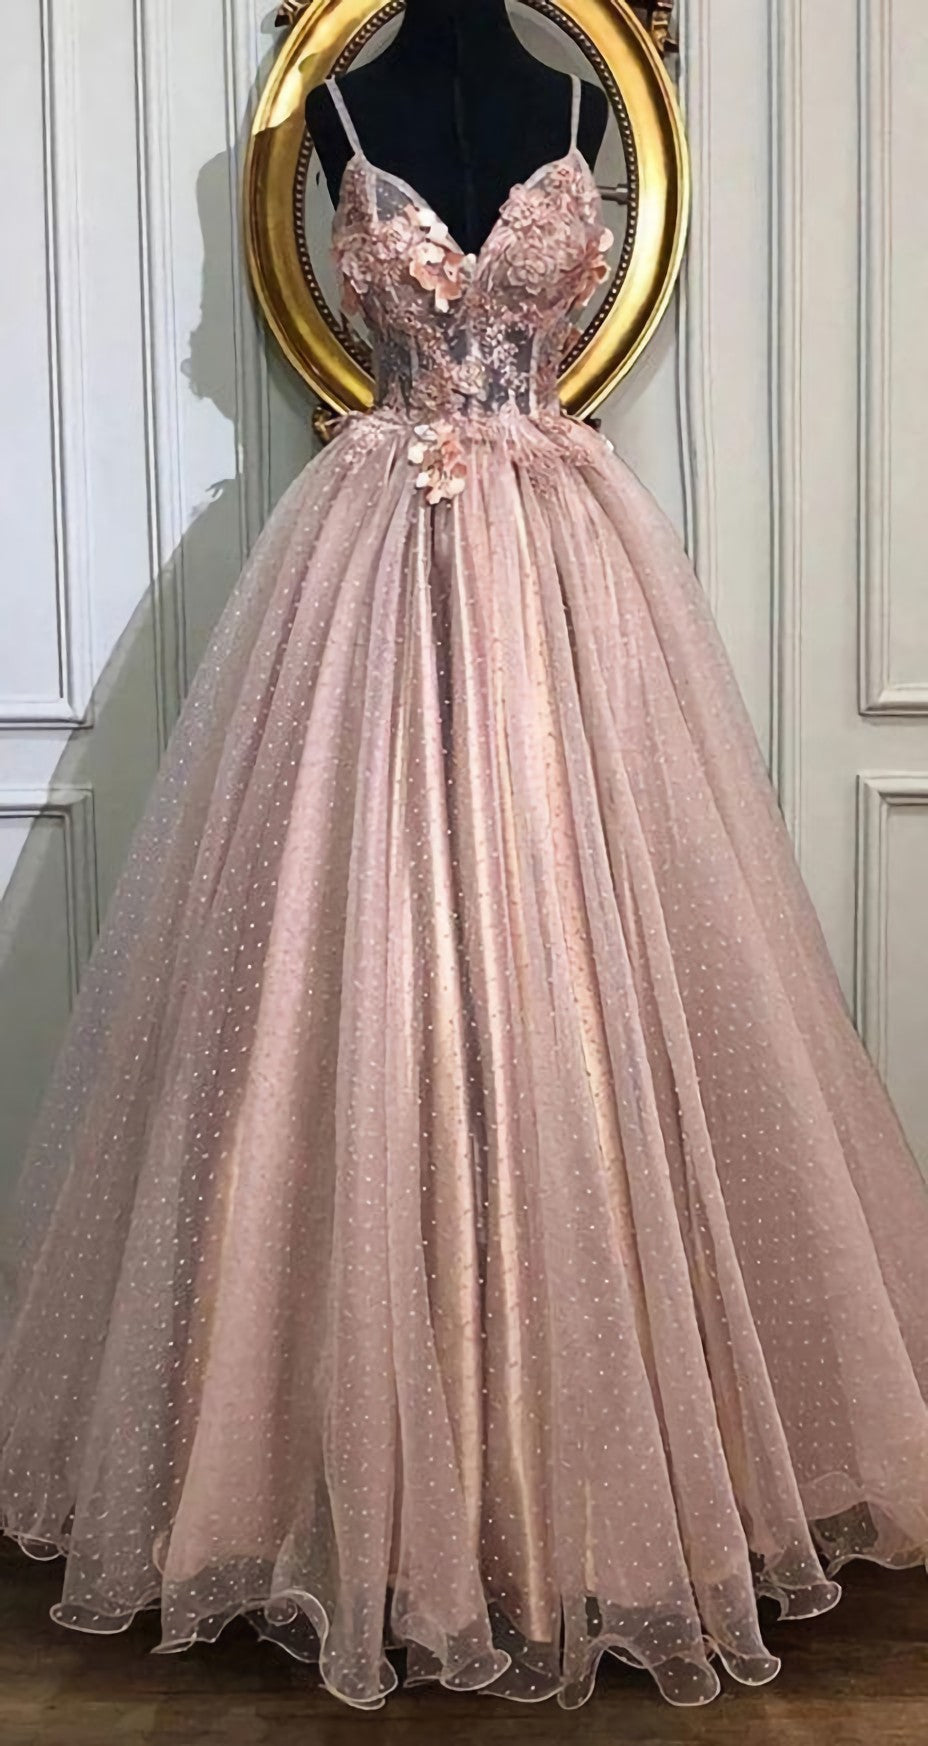 A Line V Neck Tulle Long Corset Prom Dresses, Pearl Pink Appliques Corset Formal Evening Dress outfit, Formal Dress For Weddings Guest